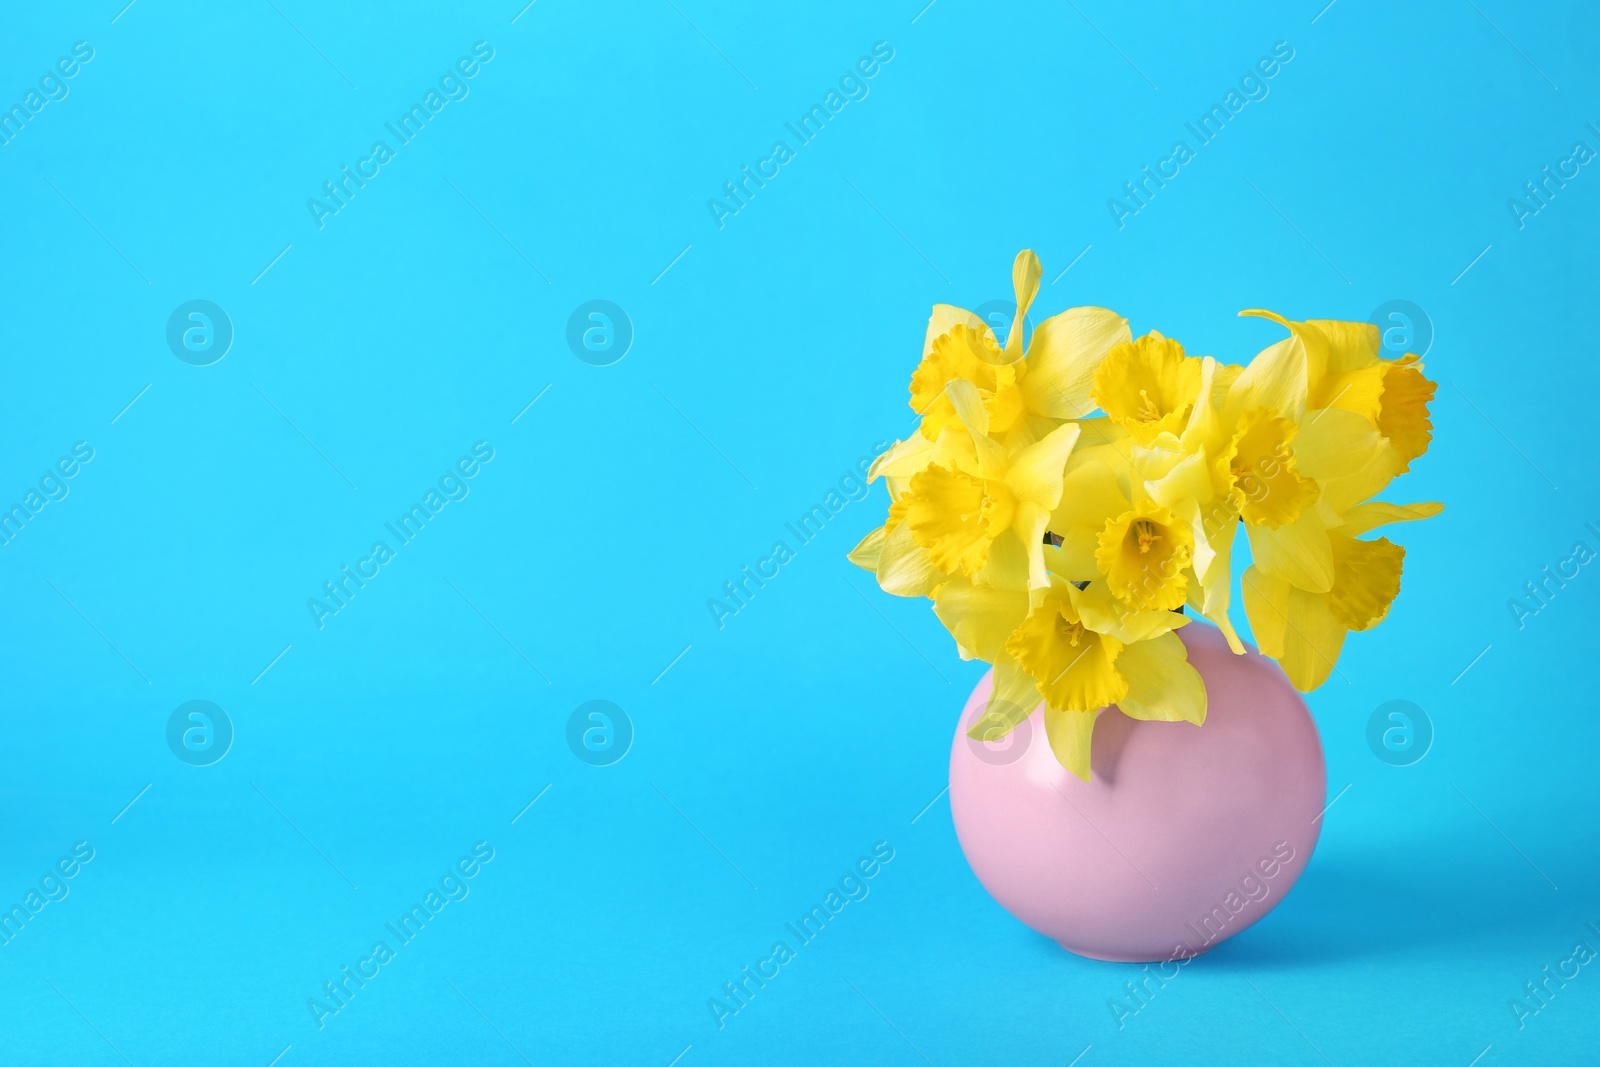 Photo of Bouquet of beautiful yellow daffodils in vase on light blue background, space for text